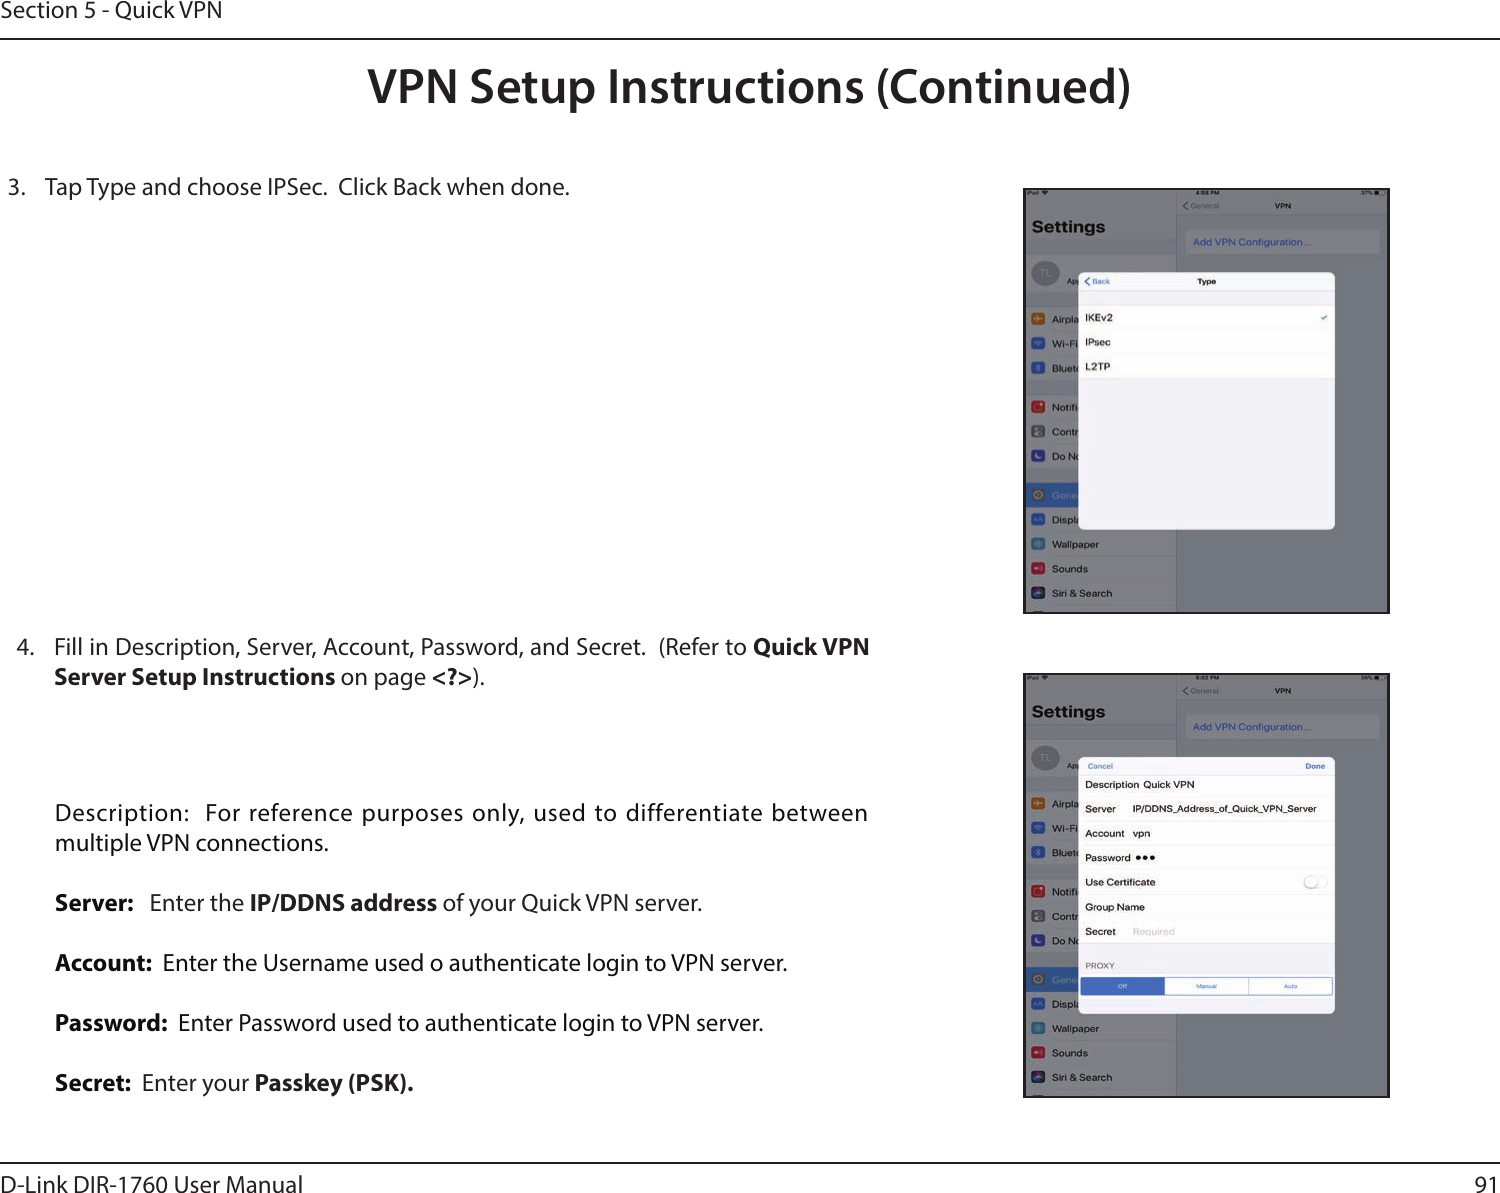 91D-Link DIR-1760 User ManualSection 5 - Quick VPNVPN Setup Instructions (Continued)3.  Tap Type and choose IPSec.  Click Back when done.  4.  Fill in Description, Server, Account, Password, and Secret.  (Refer to Quick VPN Server Setup Instructions on page &lt;?&gt;).  Description:  For reference purposes only, used to differentiate between multiple VPN connections.Server:   Enter the IP/DDNS address of your Quick VPN server.Account:  Enter the Username used o authenticate login to VPN server.Password:  Enter Password used to authenticate login to VPN server.Secret:  Enter your Passkey (PSK).